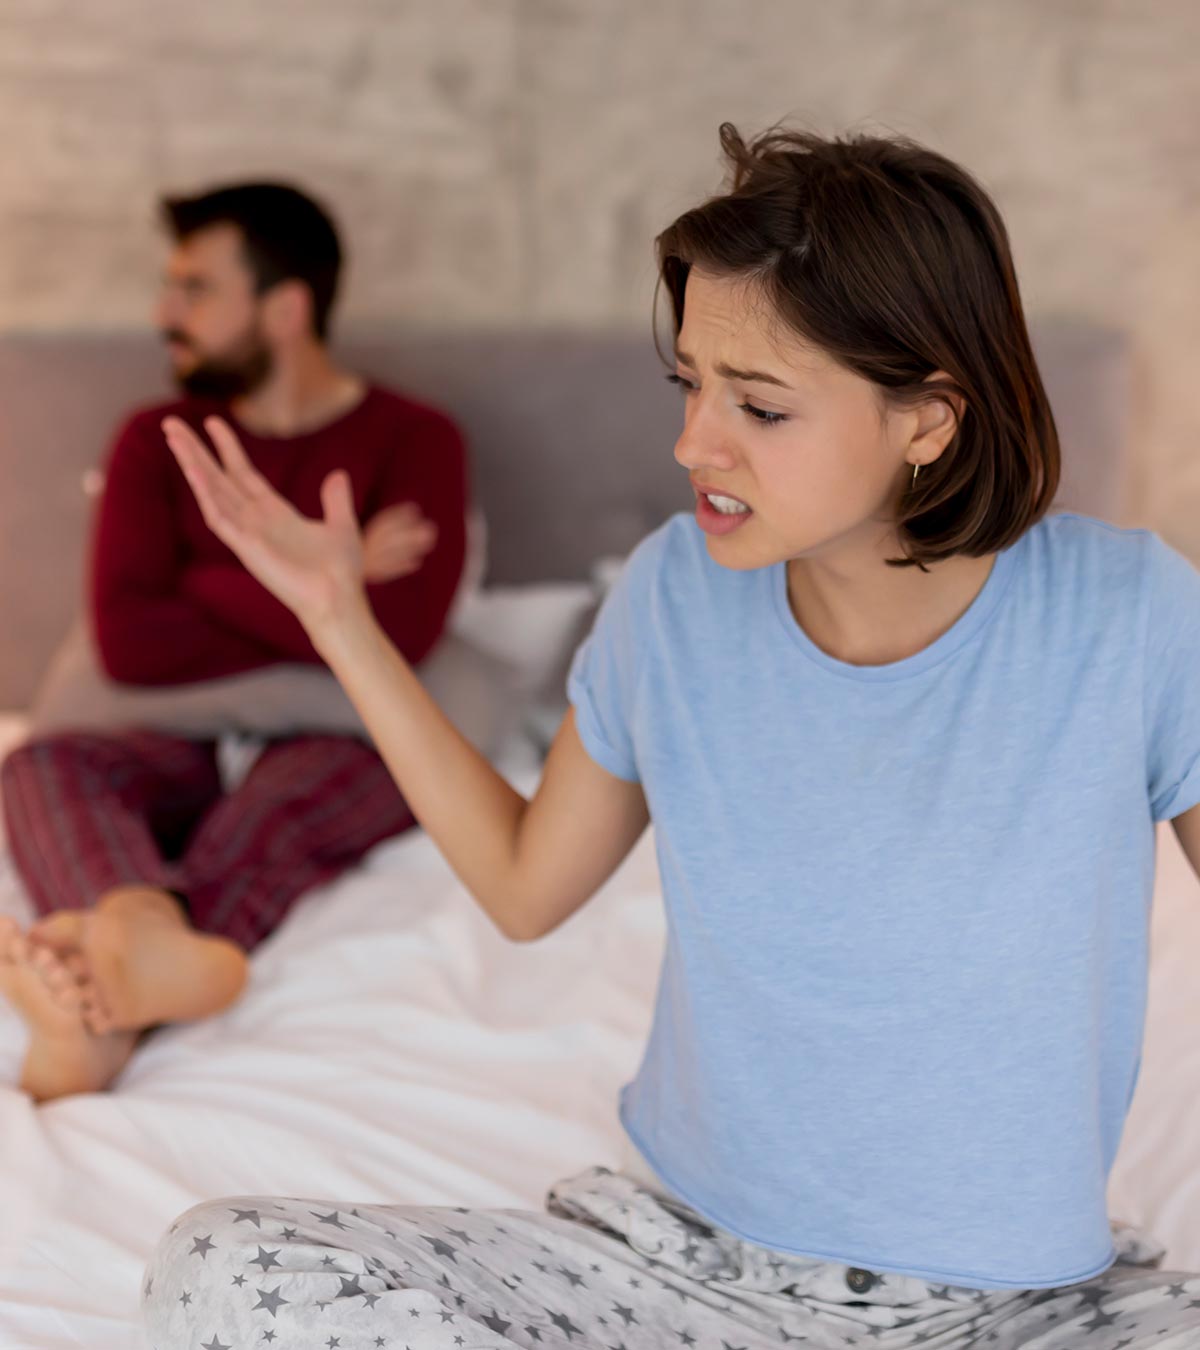 5 Signs Of A Nagging Wife And How To Stop Being One